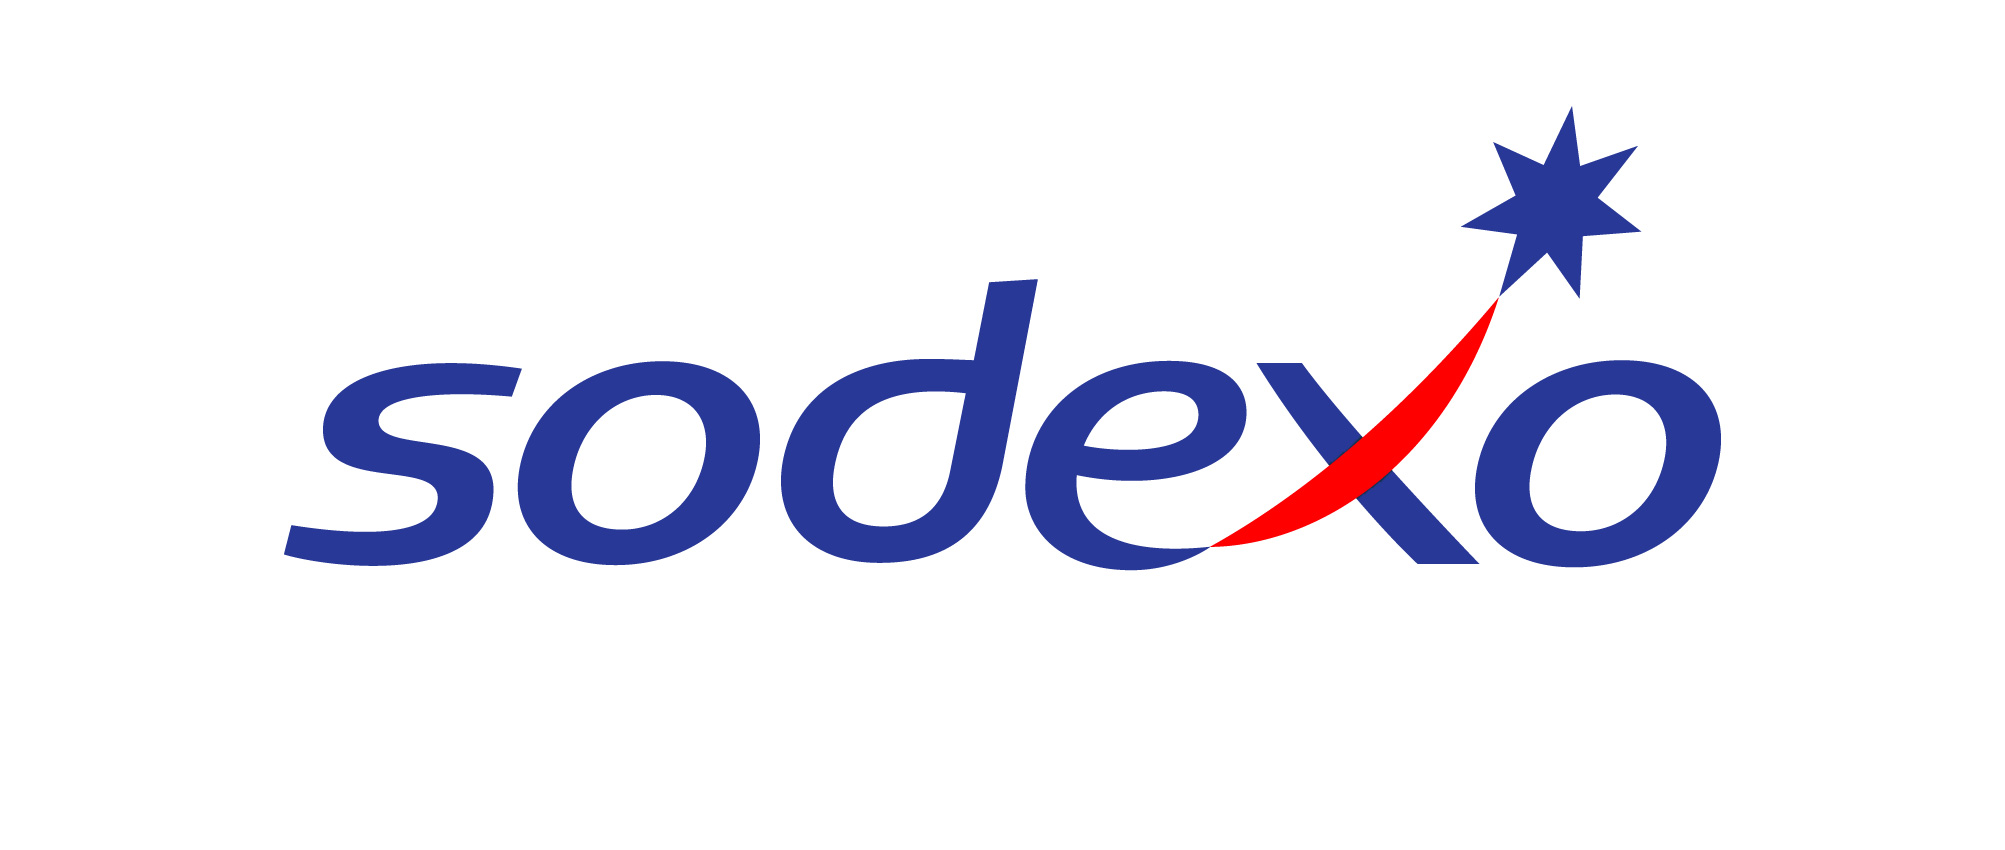 Sodexo is the global leader in services that improve Quality of Life